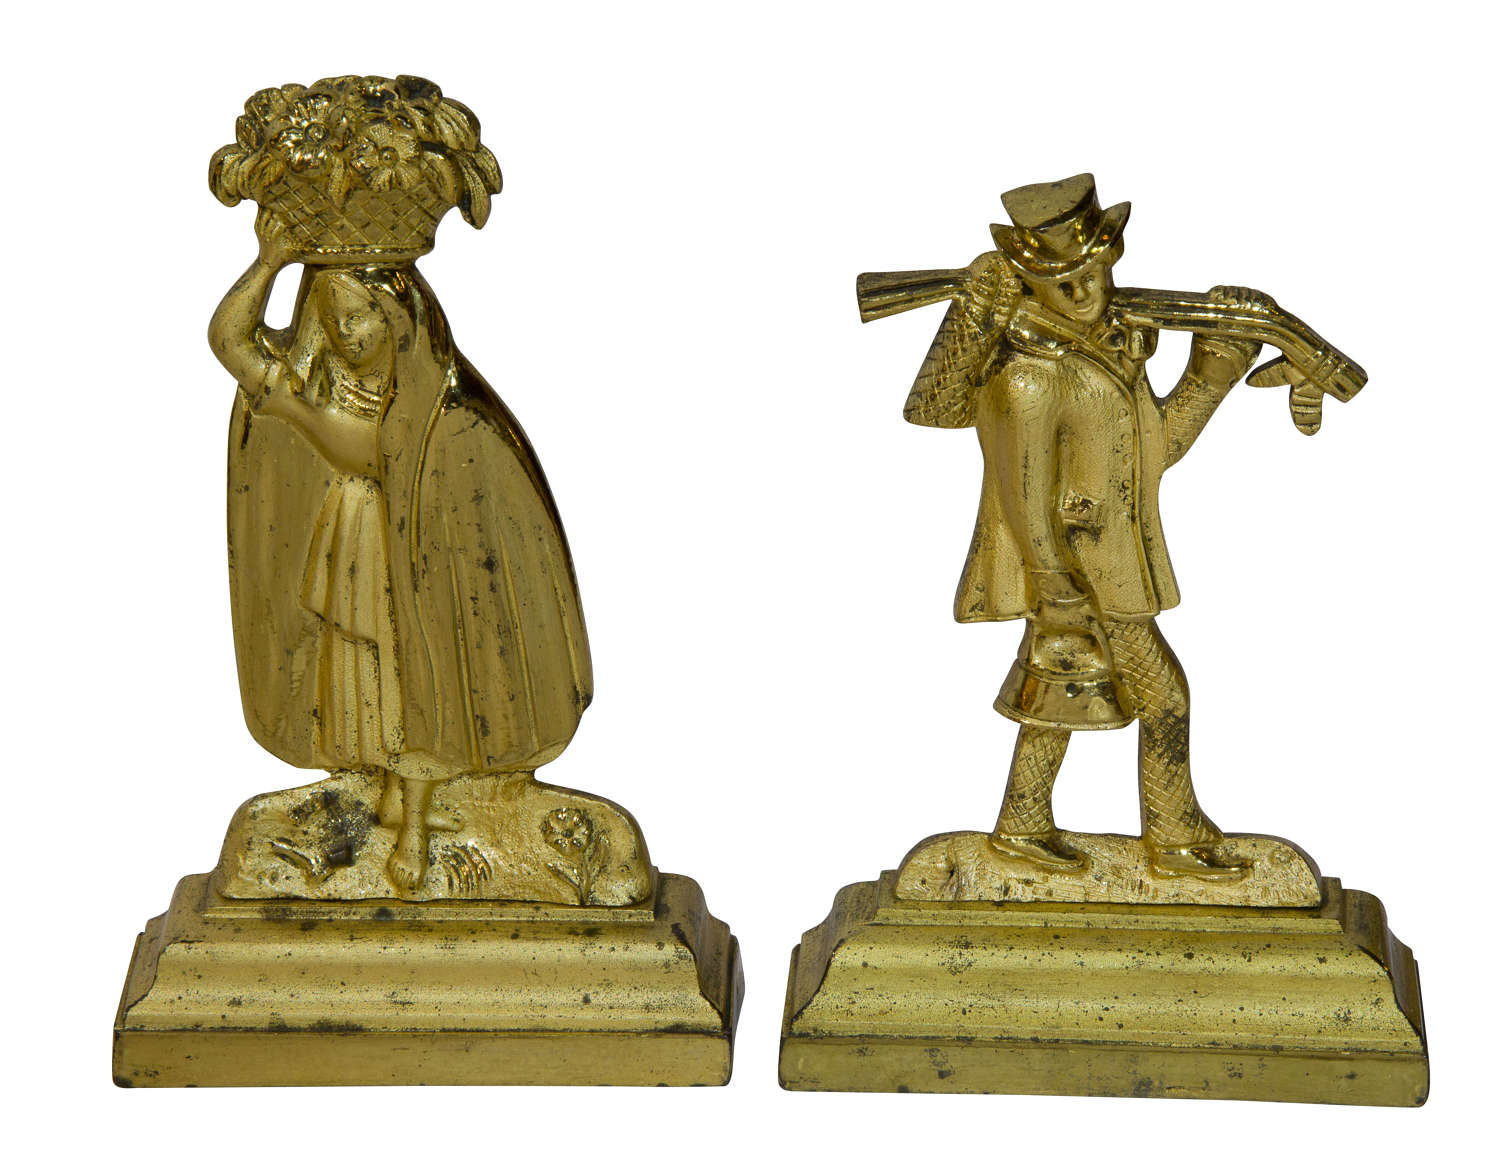 Charming Pair of French Gilt Bronze Figurines of Flower and Sportsman